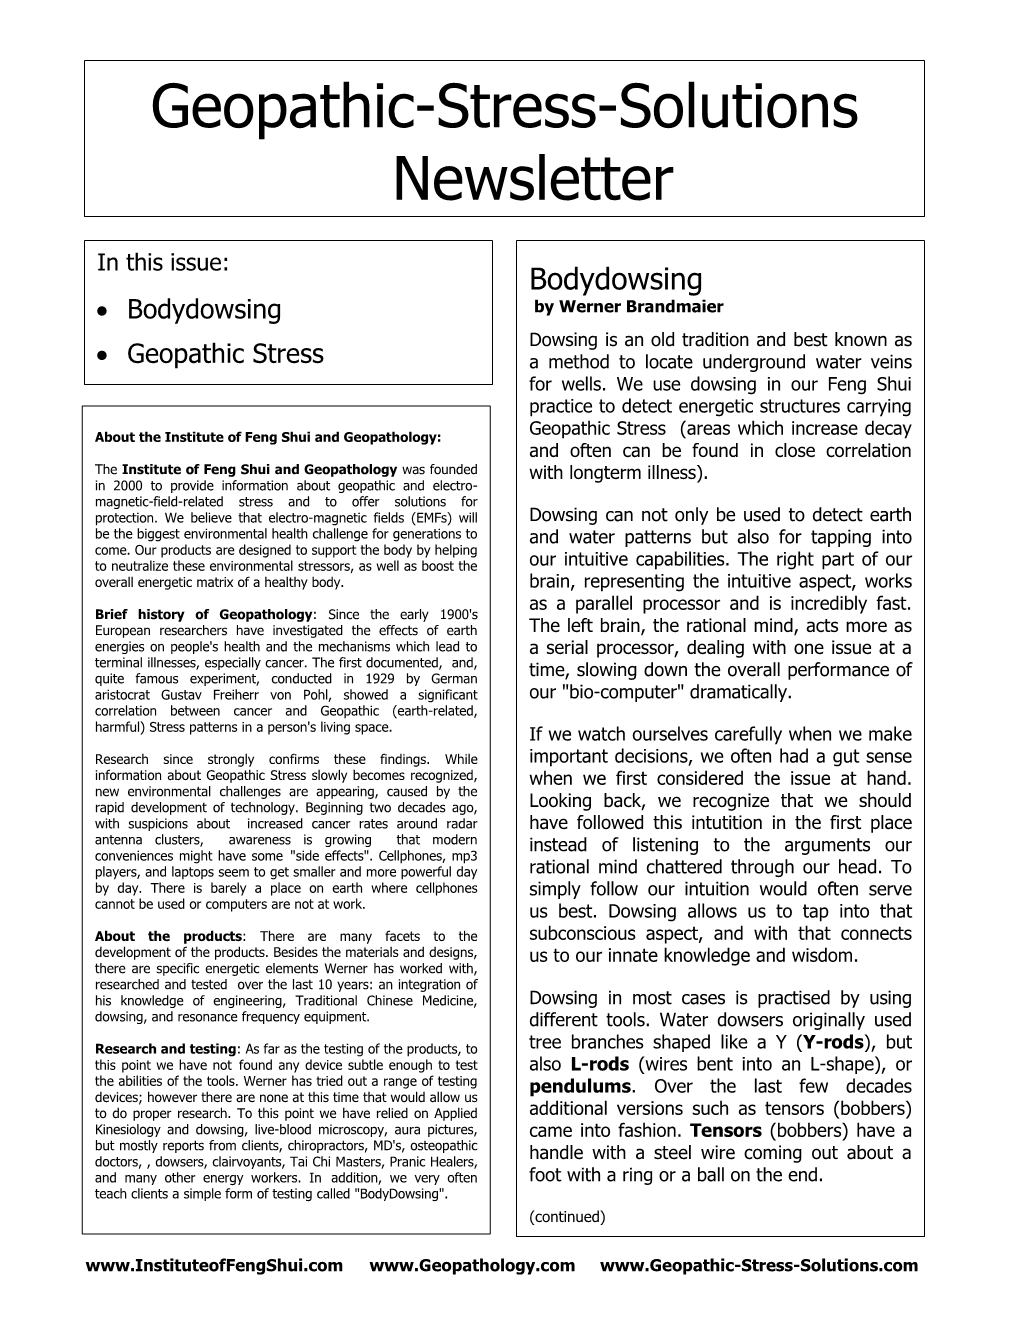 Geopathic-Stress-Solutions Newsletter